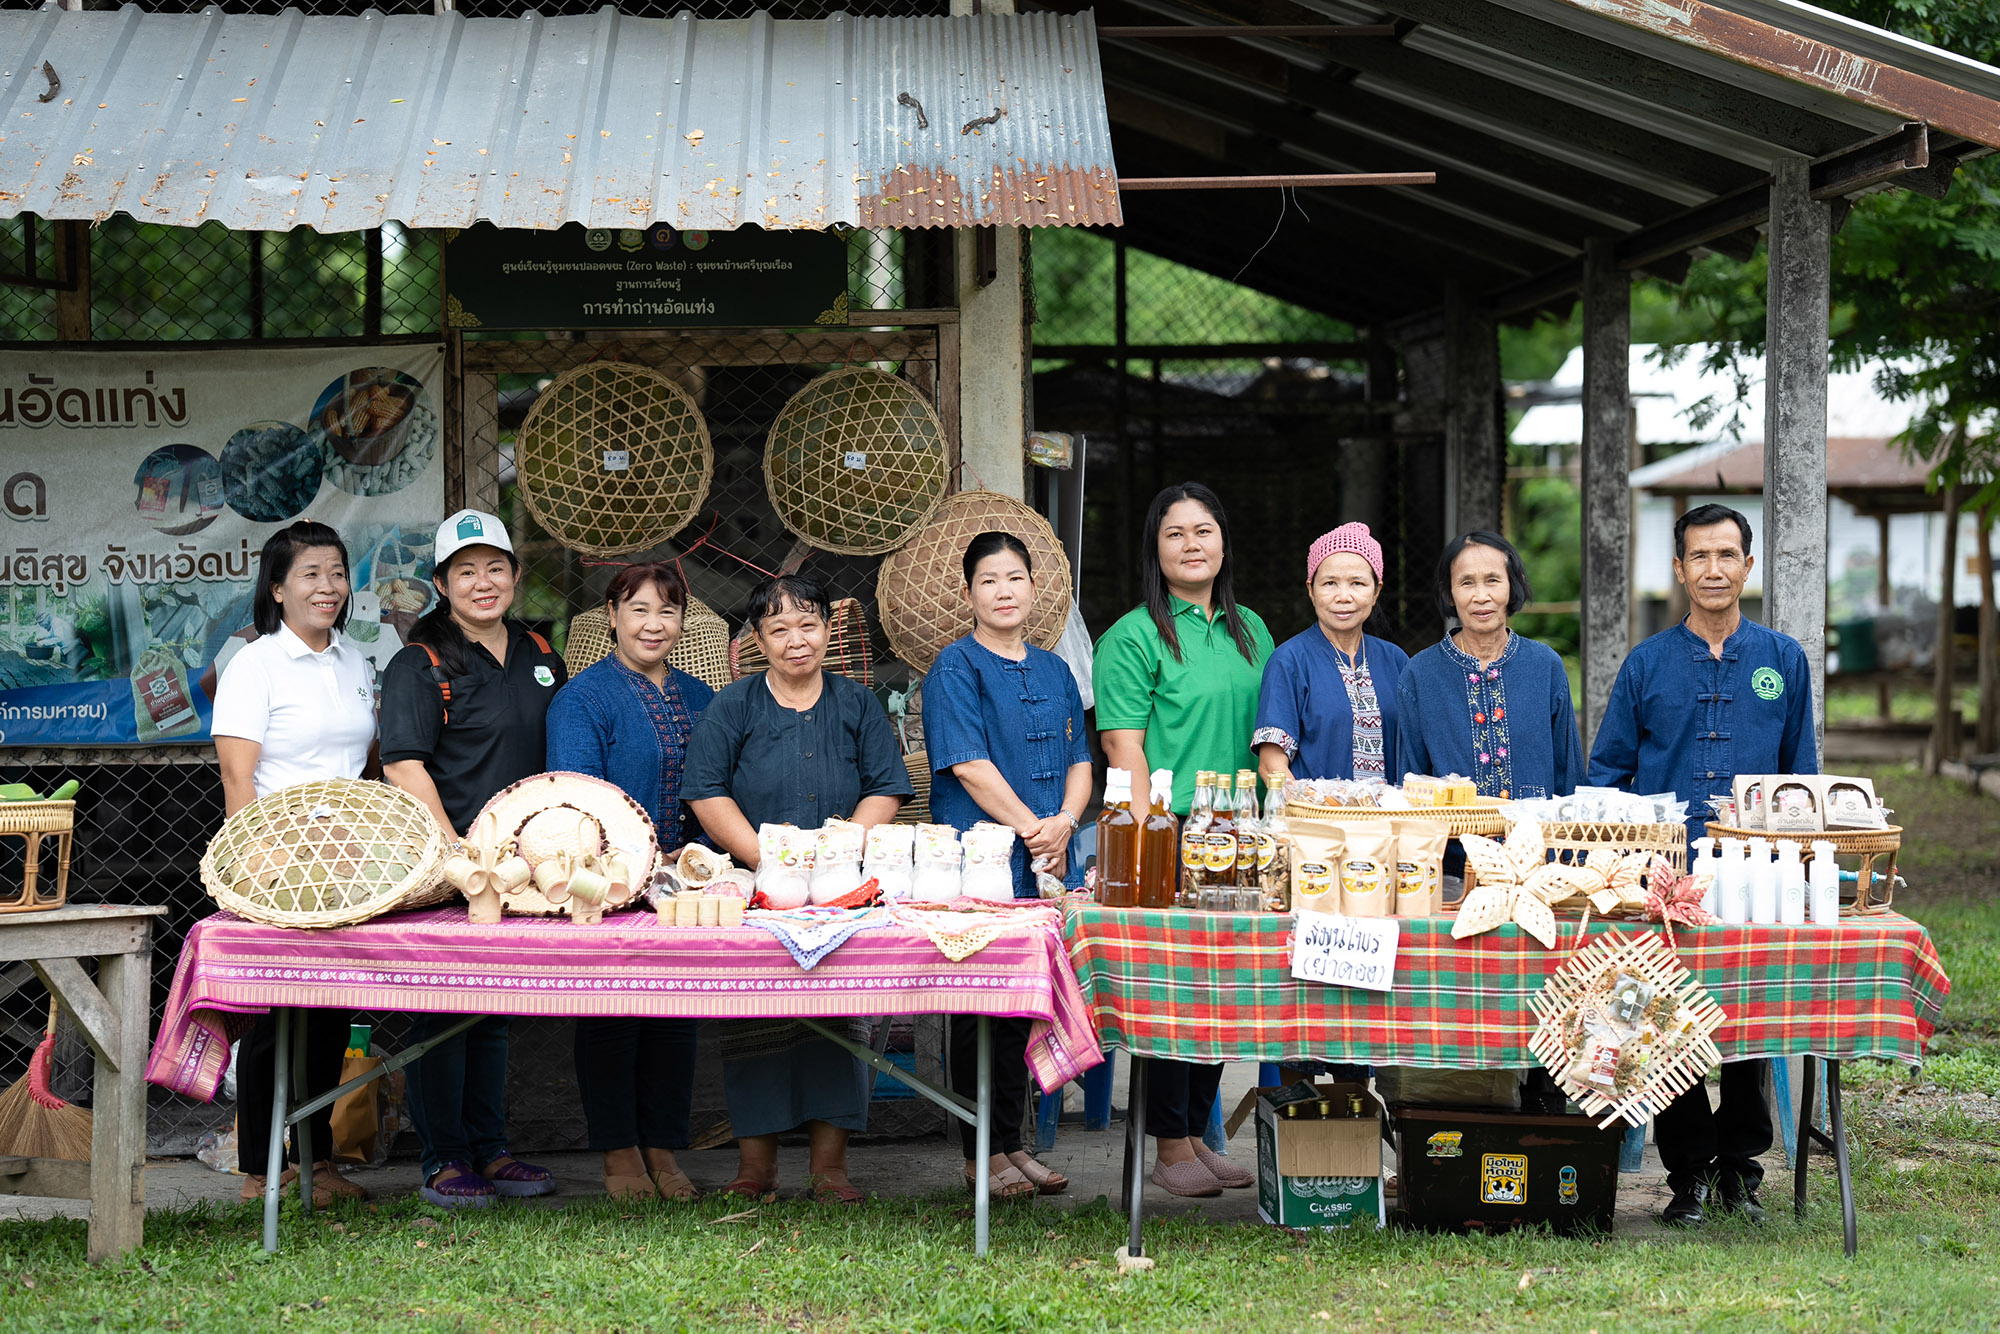 Community members in Santisuk district, Nan province. Value-added non-timber forest products, including woven handicrafts and herbal products, can supplement local incomes.